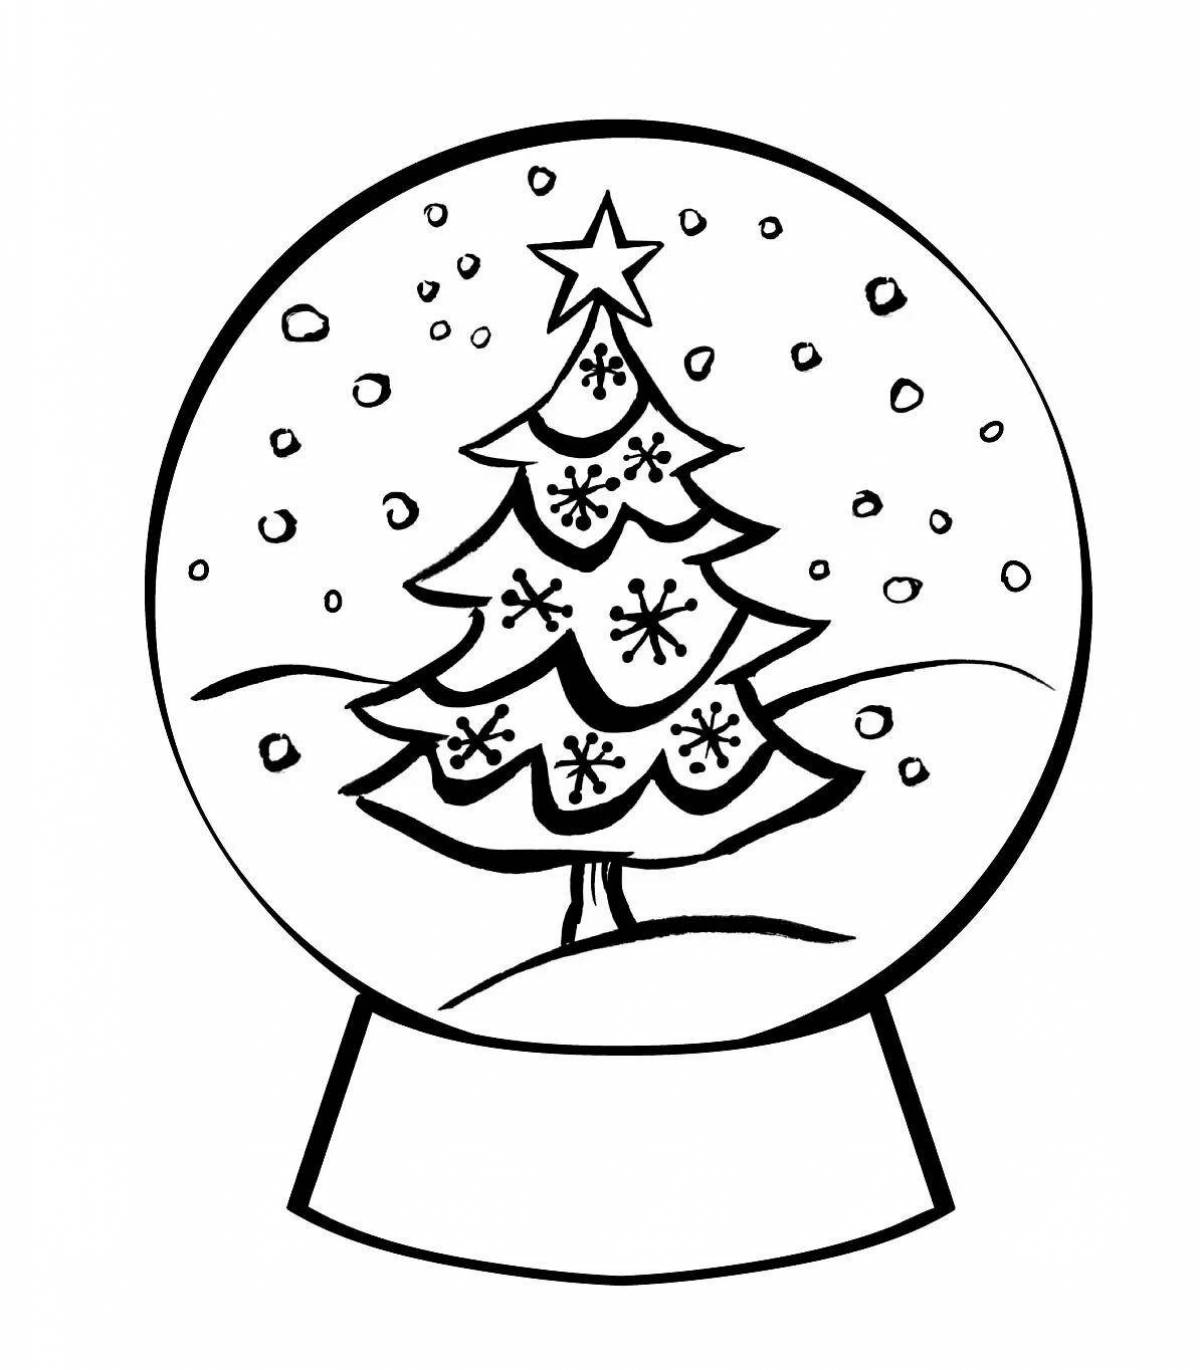 Coloring page of festive glass christmas ball